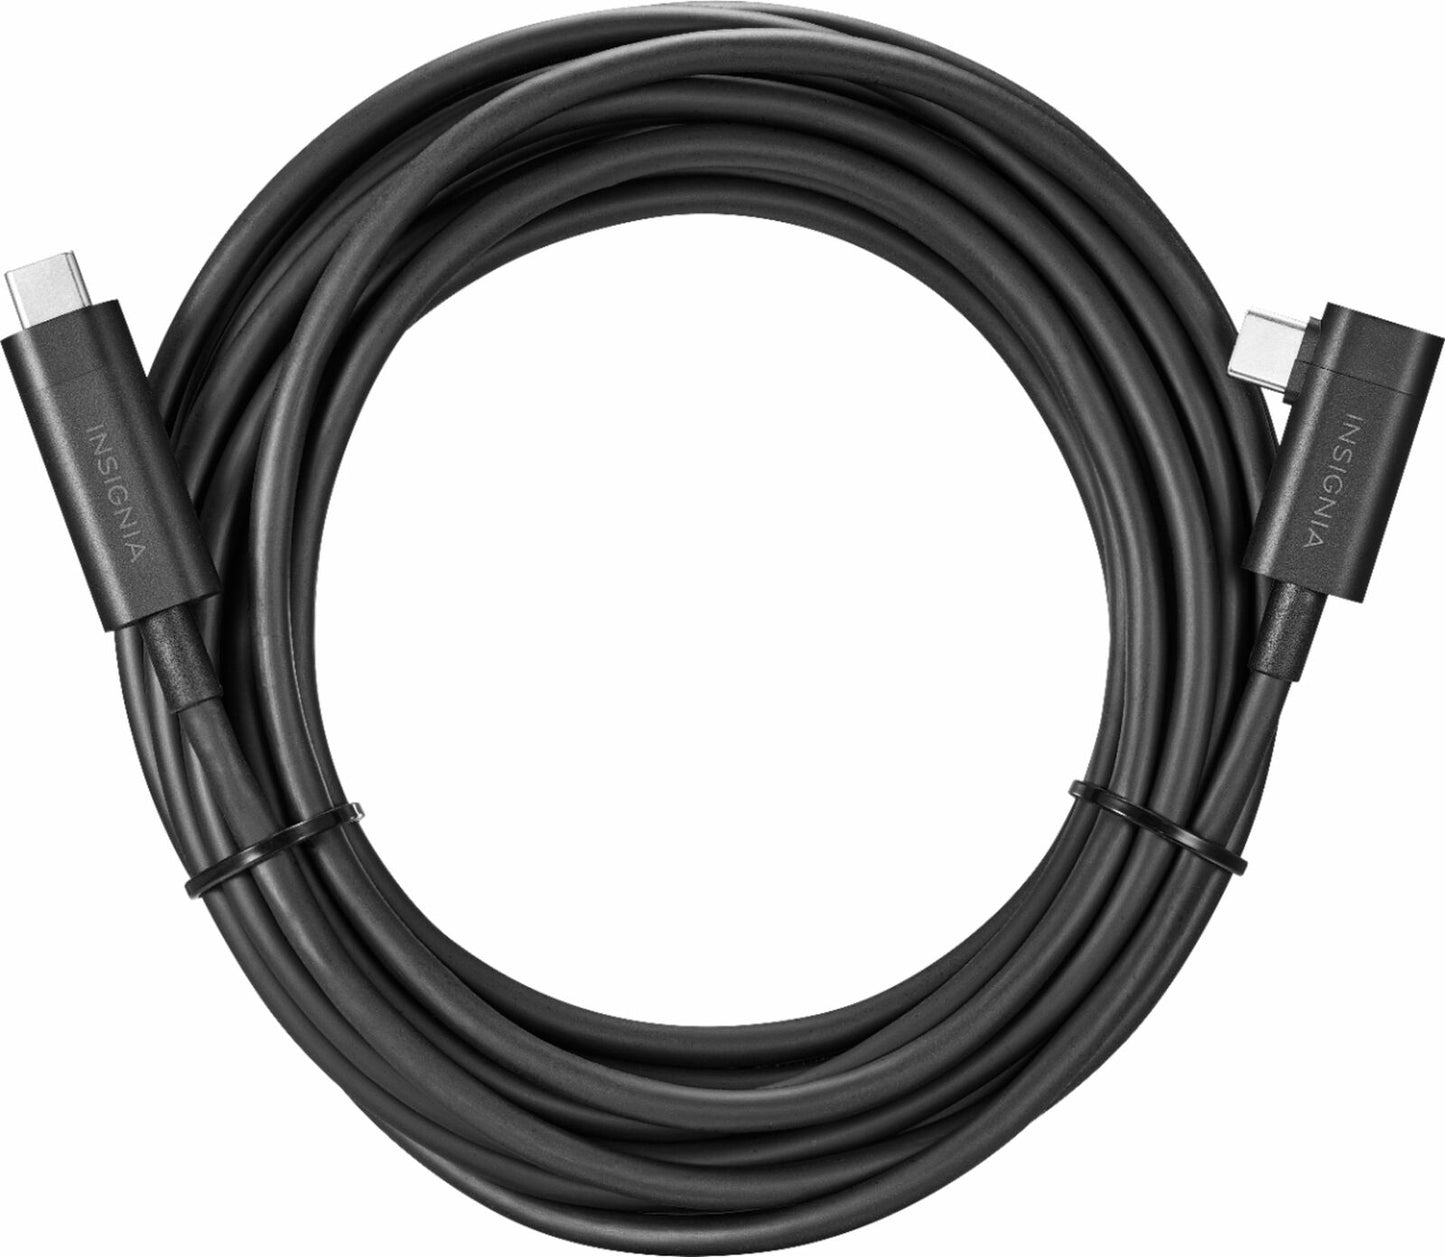 Oculus Link Virtual Reality Headset Cable for Quest and Quest 2 - Rekes Sales